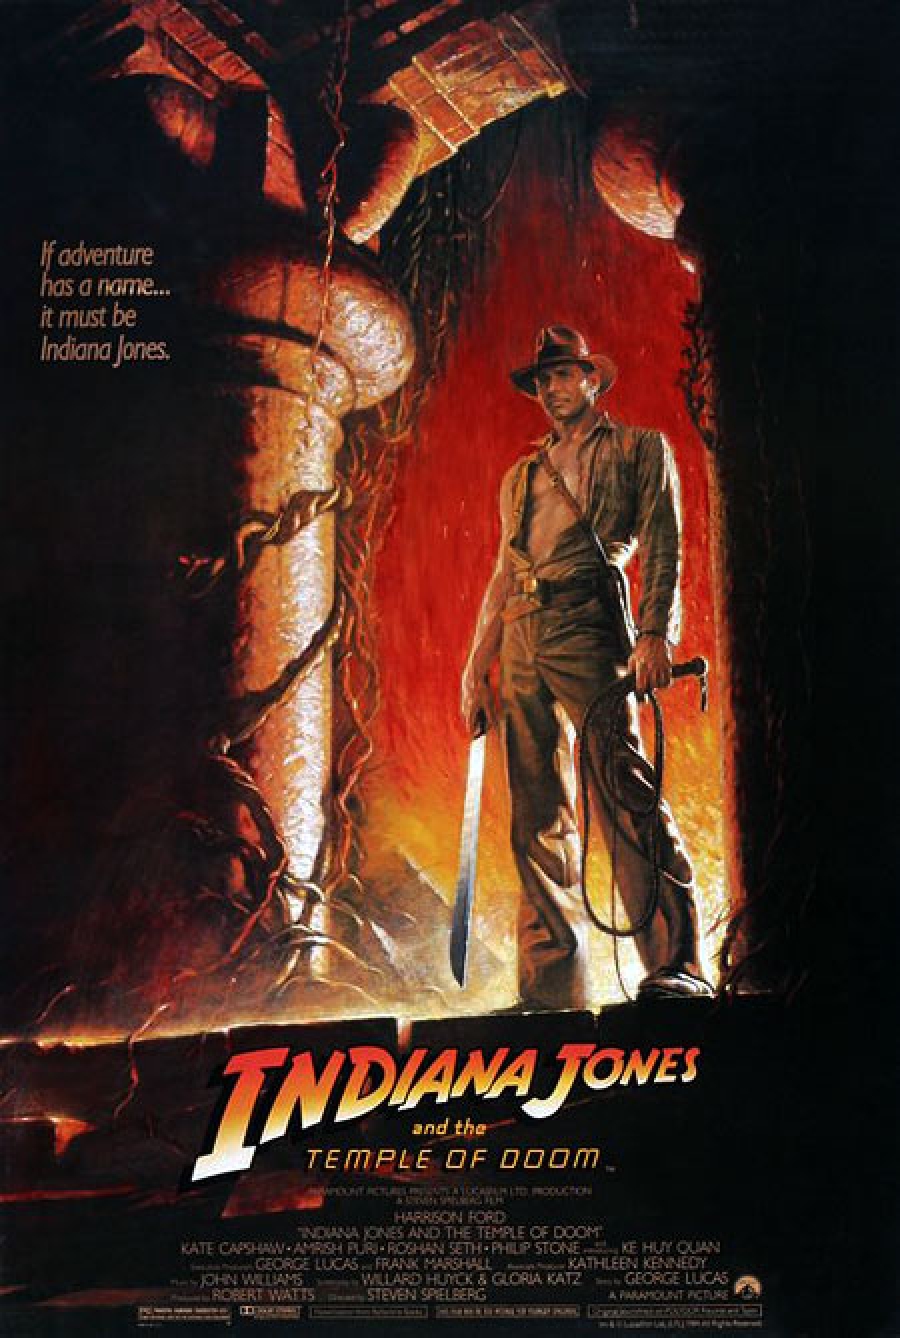 1984 Vintage Indiana Jones & The Temple of Doom Promotional Movie Pin Badge